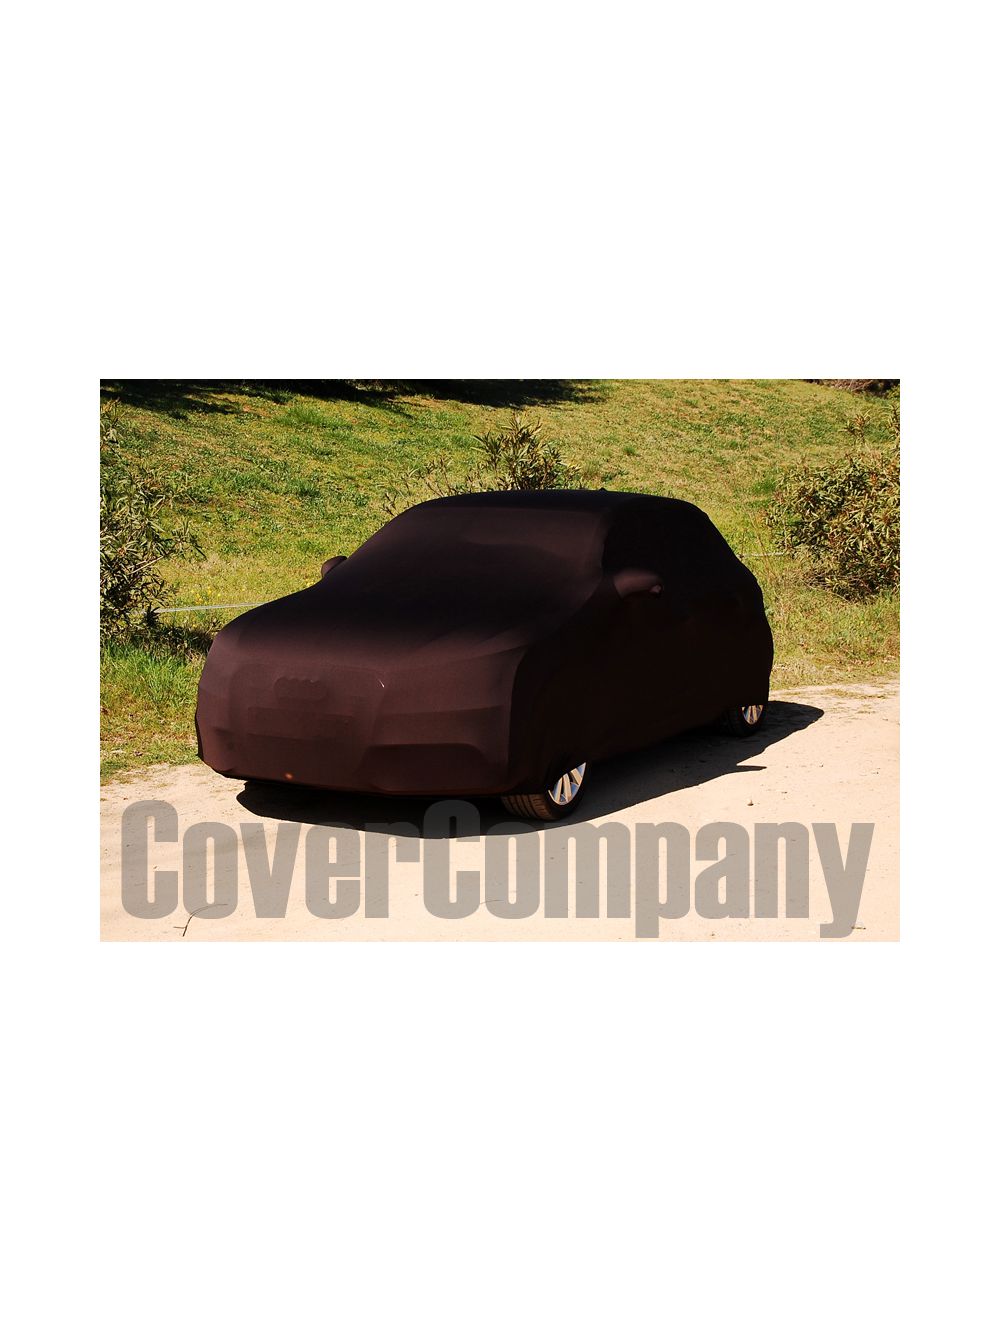 Breathable Car Cover for Audi TT Car Cover All Weather Car Cover